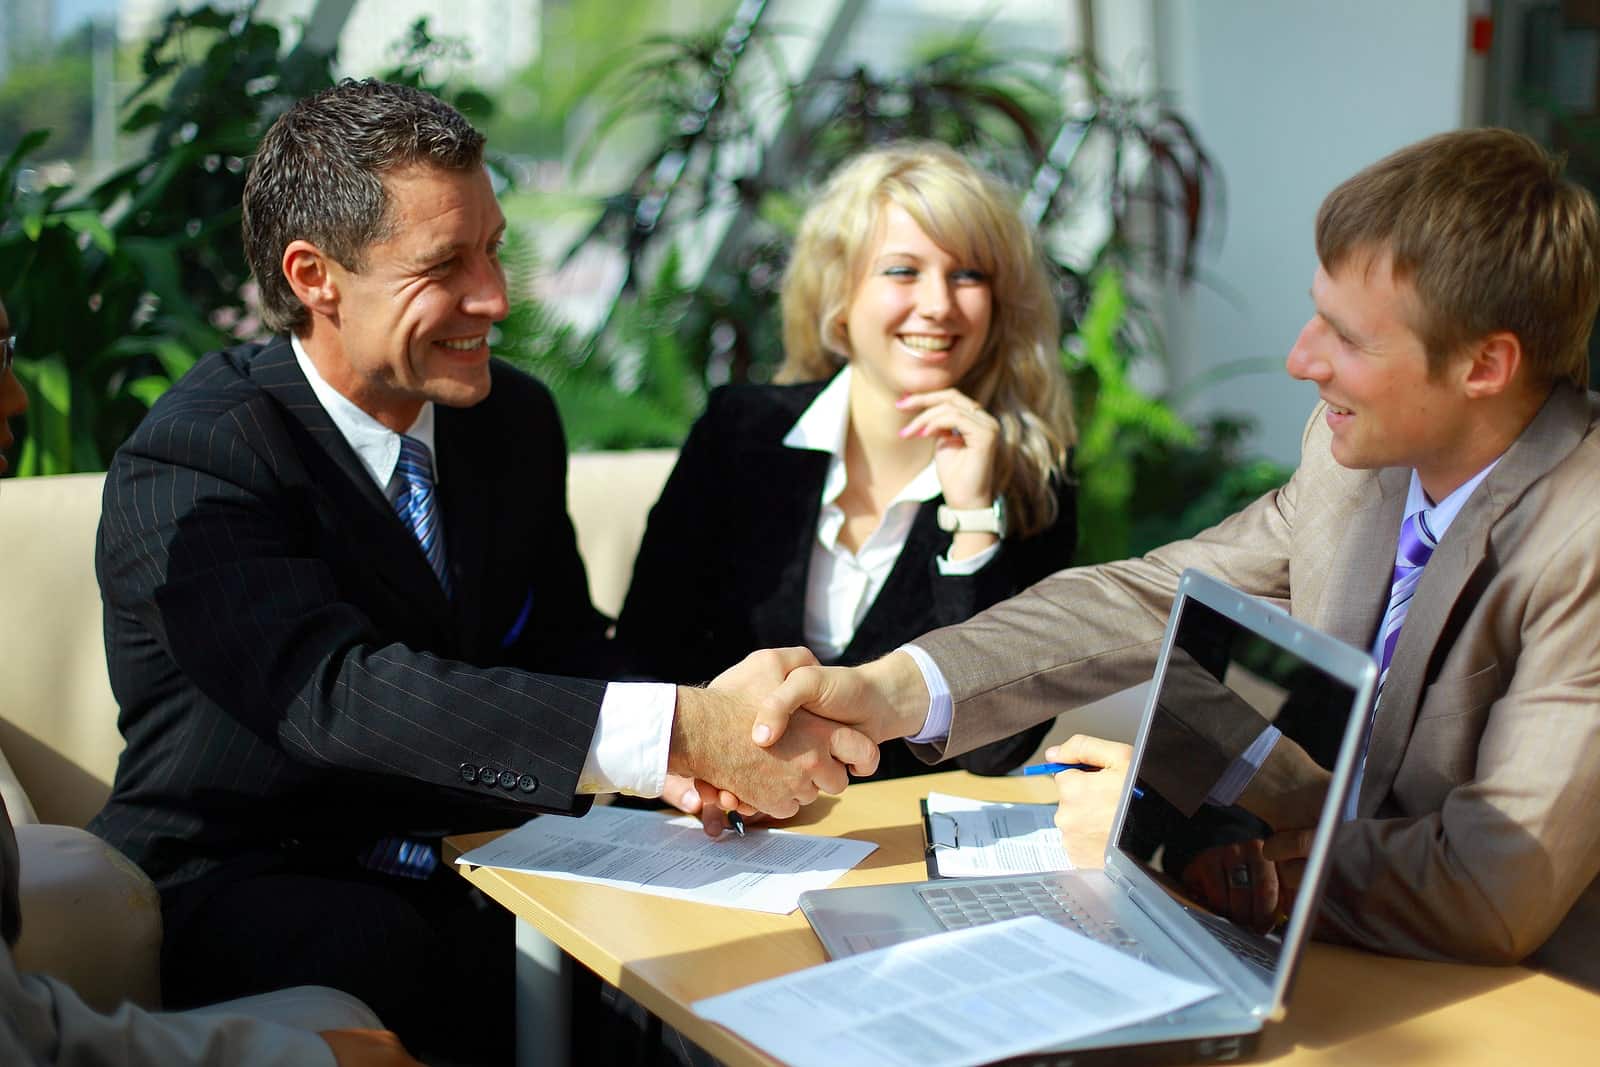 A group of business people shaking hands and smiling at a desk.